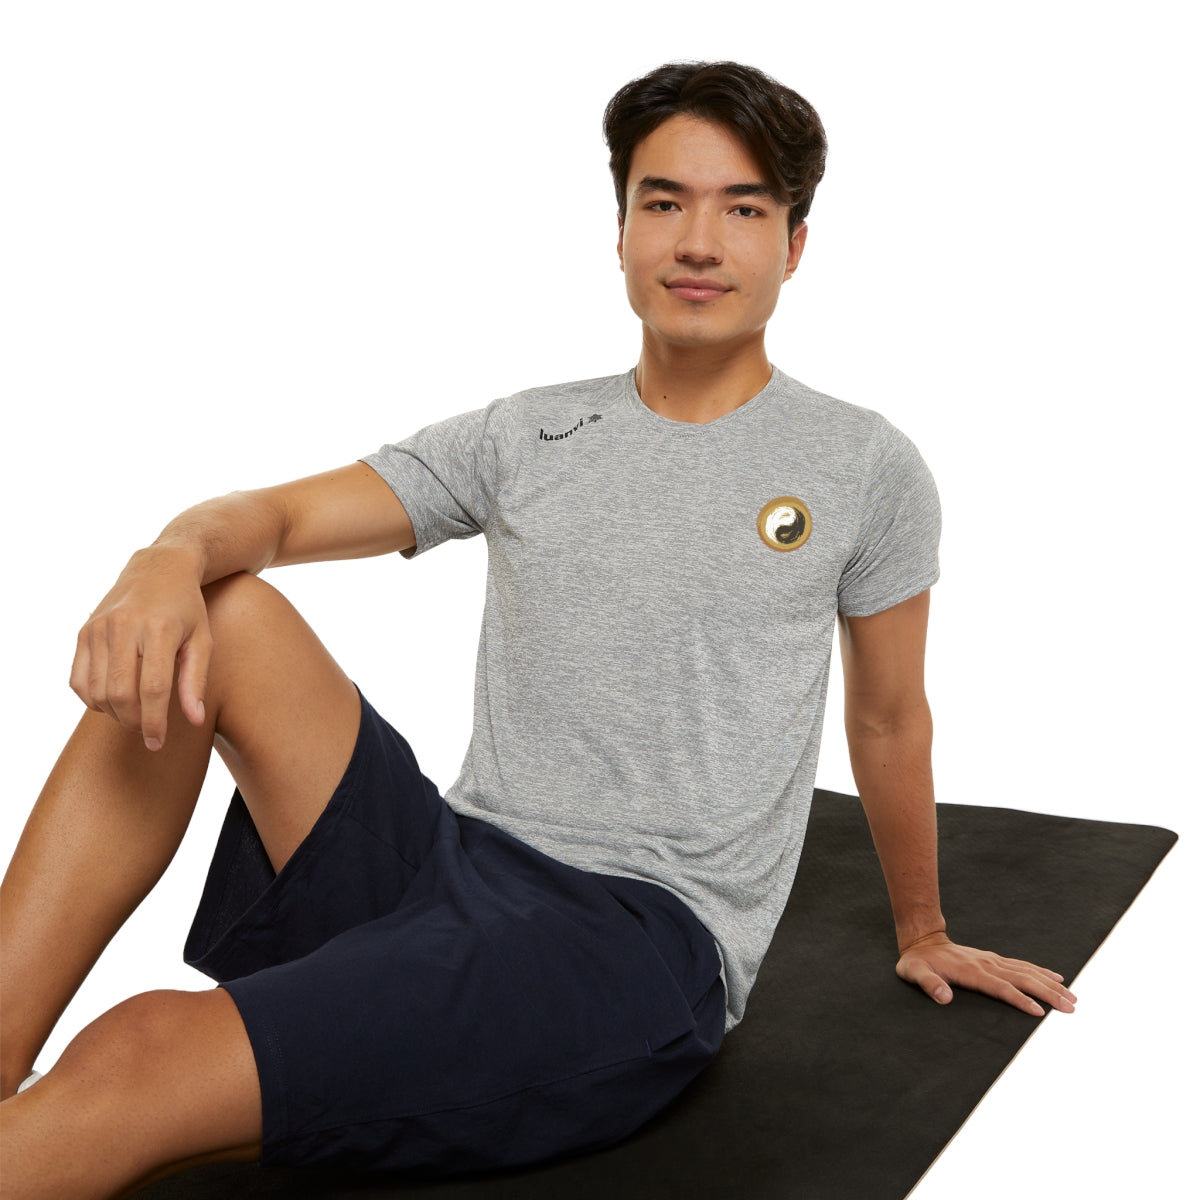 Men's Yoga and Sports T-shirt - Eco Friendly - Personal Hour for Yoga and Meditations 